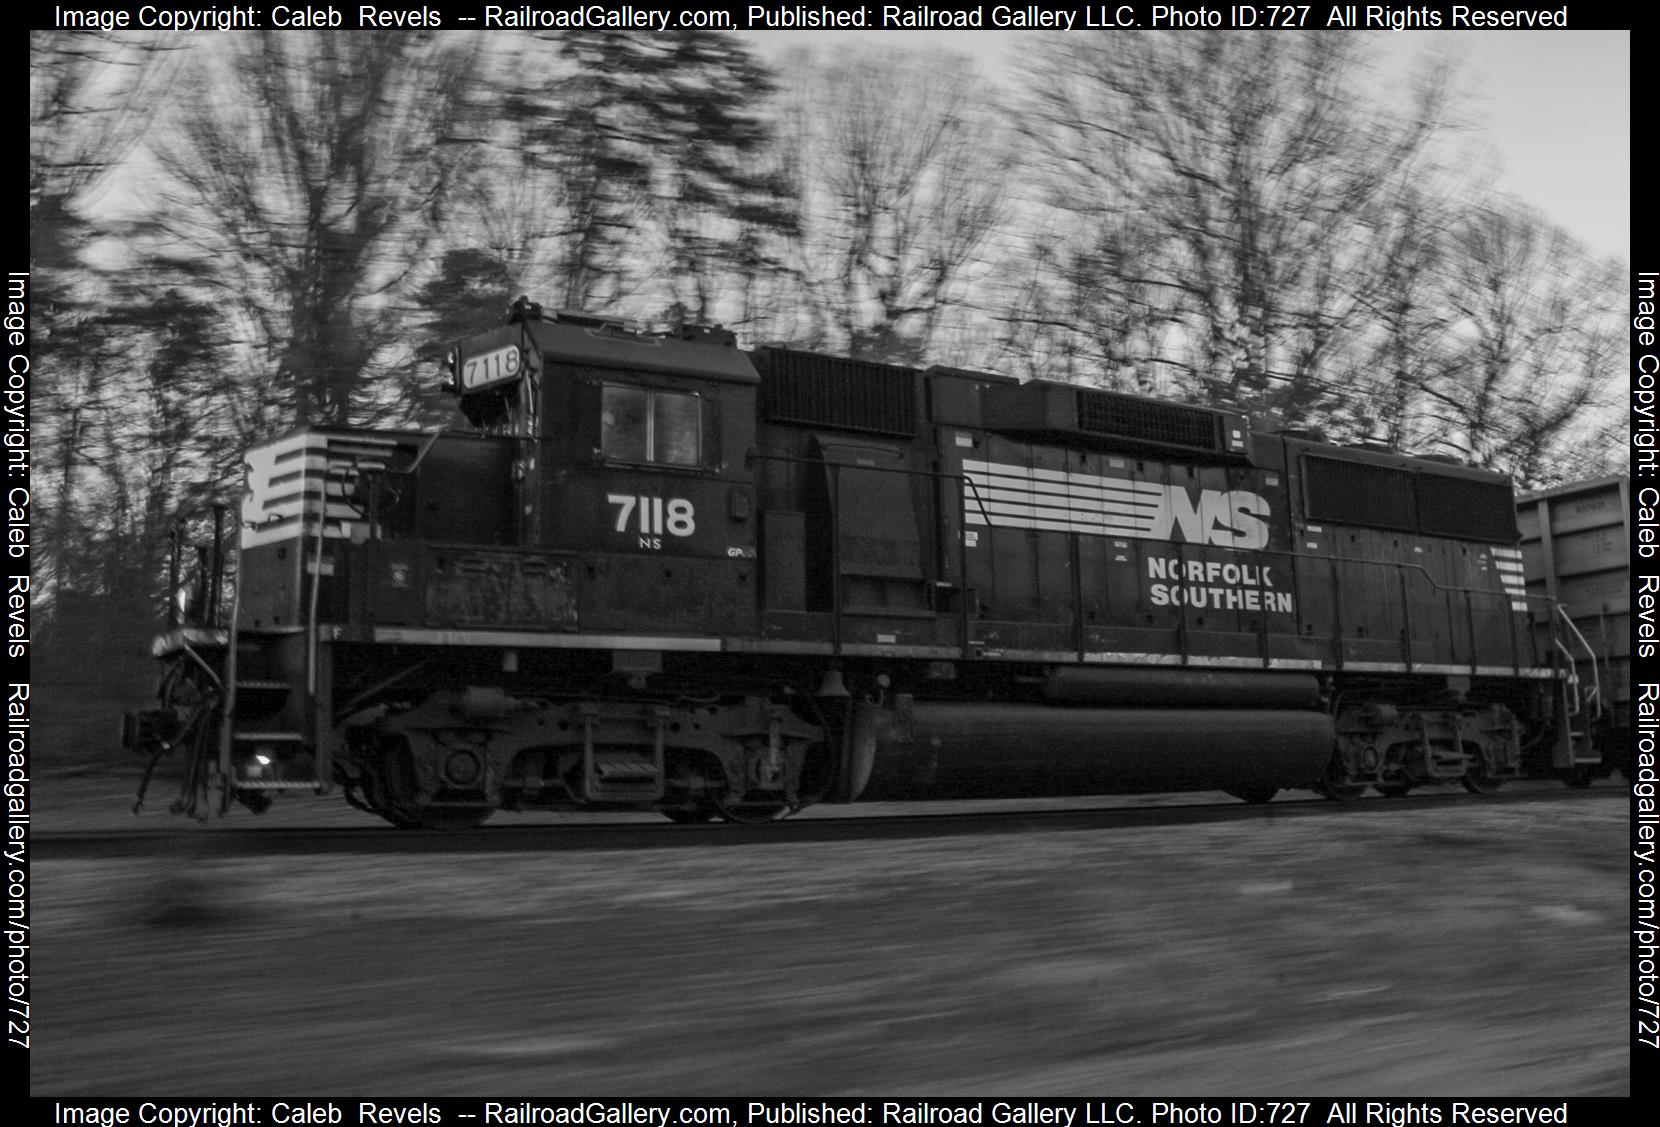 NS 7118 is a class EMD GP60 and  is pictured in Salisbury , North Carolina, USA.  This was taken along the Norfolk Southern N Line  on the Norfolk Southern. Photo Copyright: Caleb  Revels  uploaded to Railroad Gallery on 02/22/2023. This photograph of NS 7118 was taken on Tuesday, December 27, 2022. All Rights Reserved. 